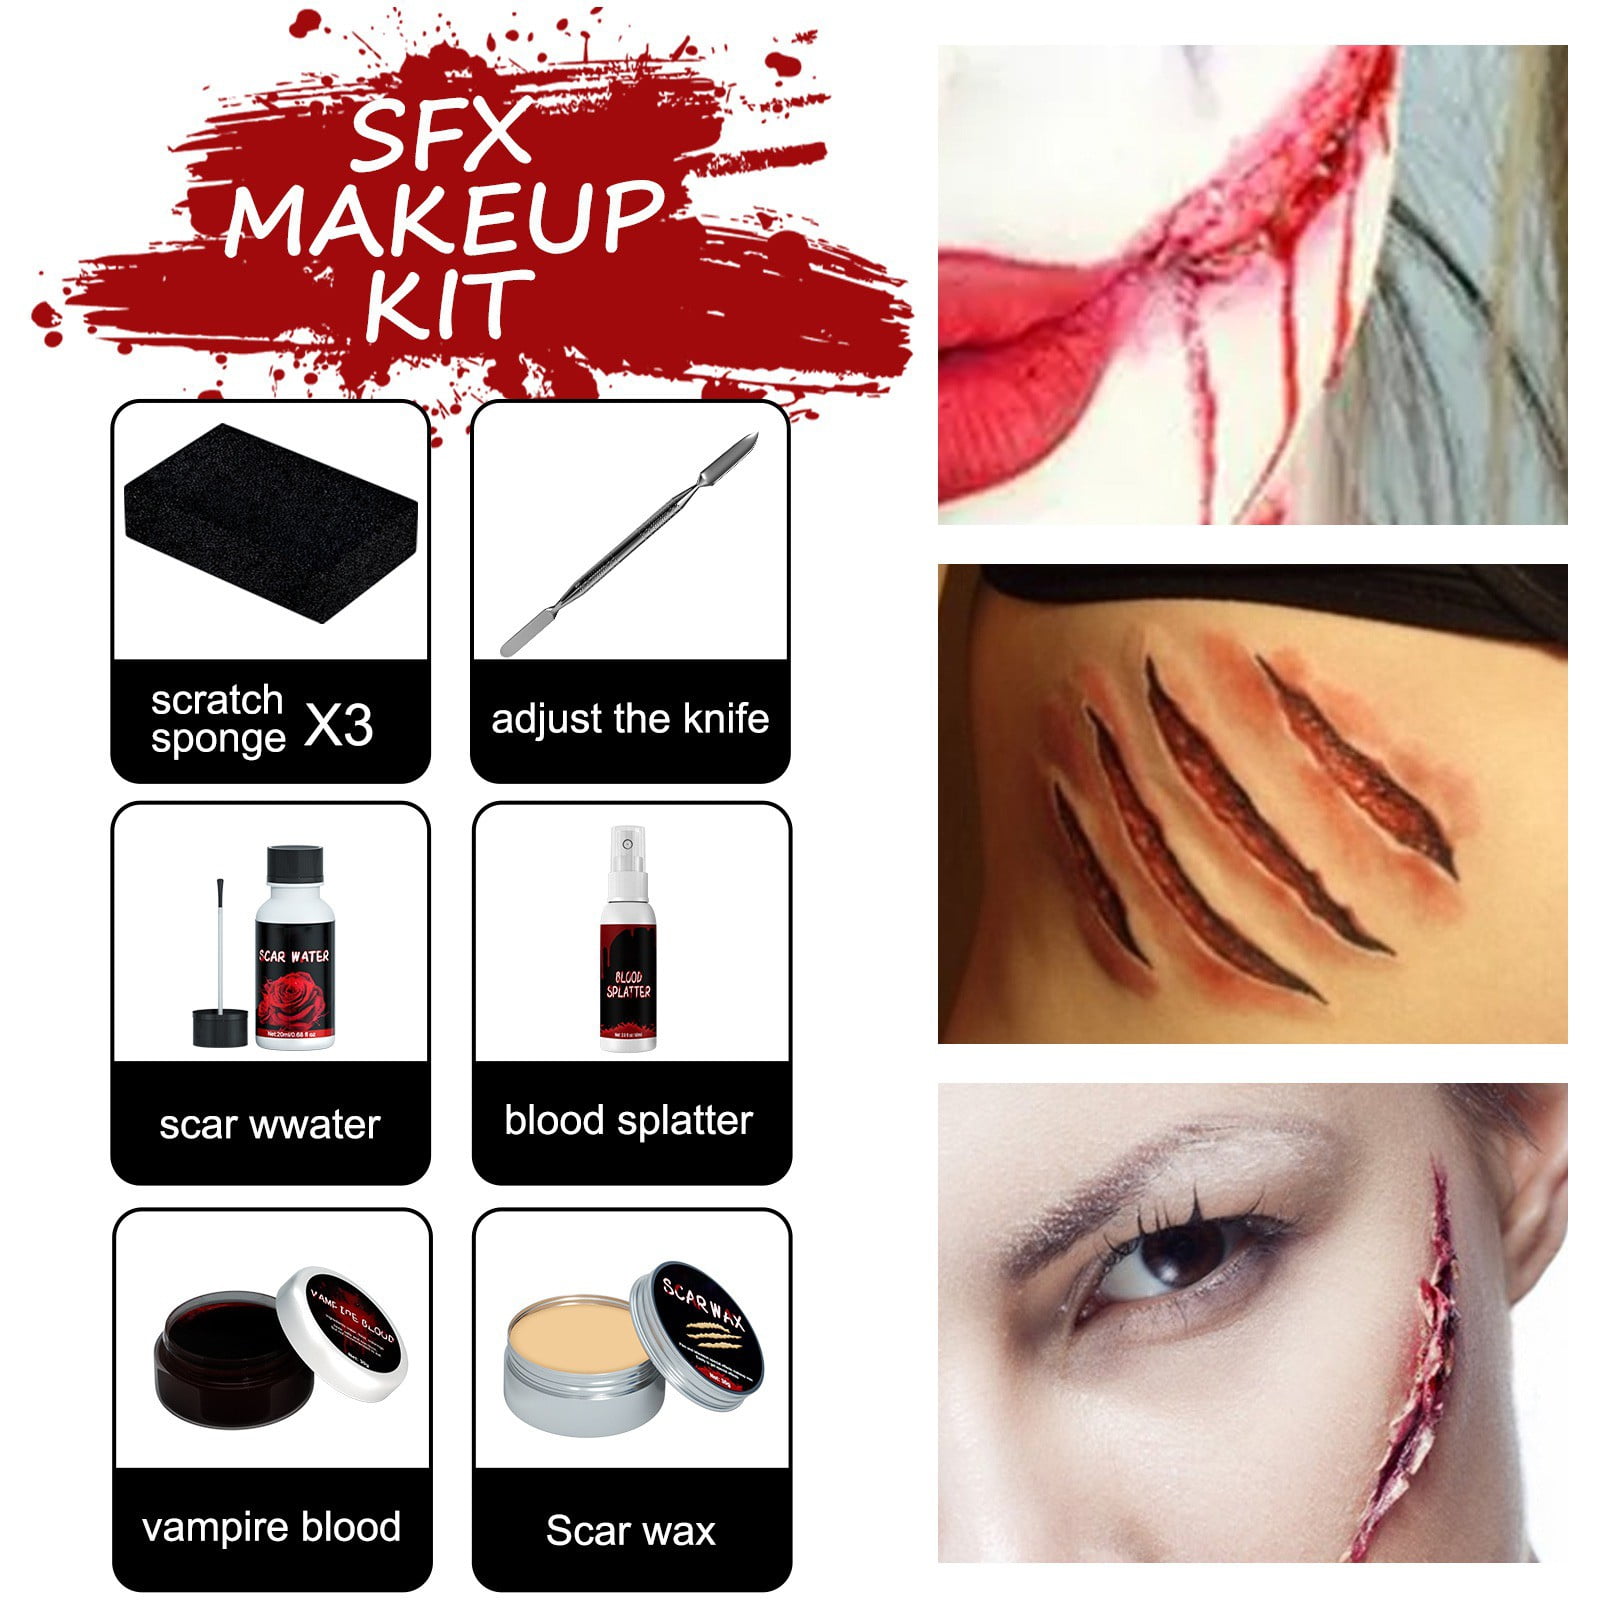 What should I have in my SFX makeup kit?